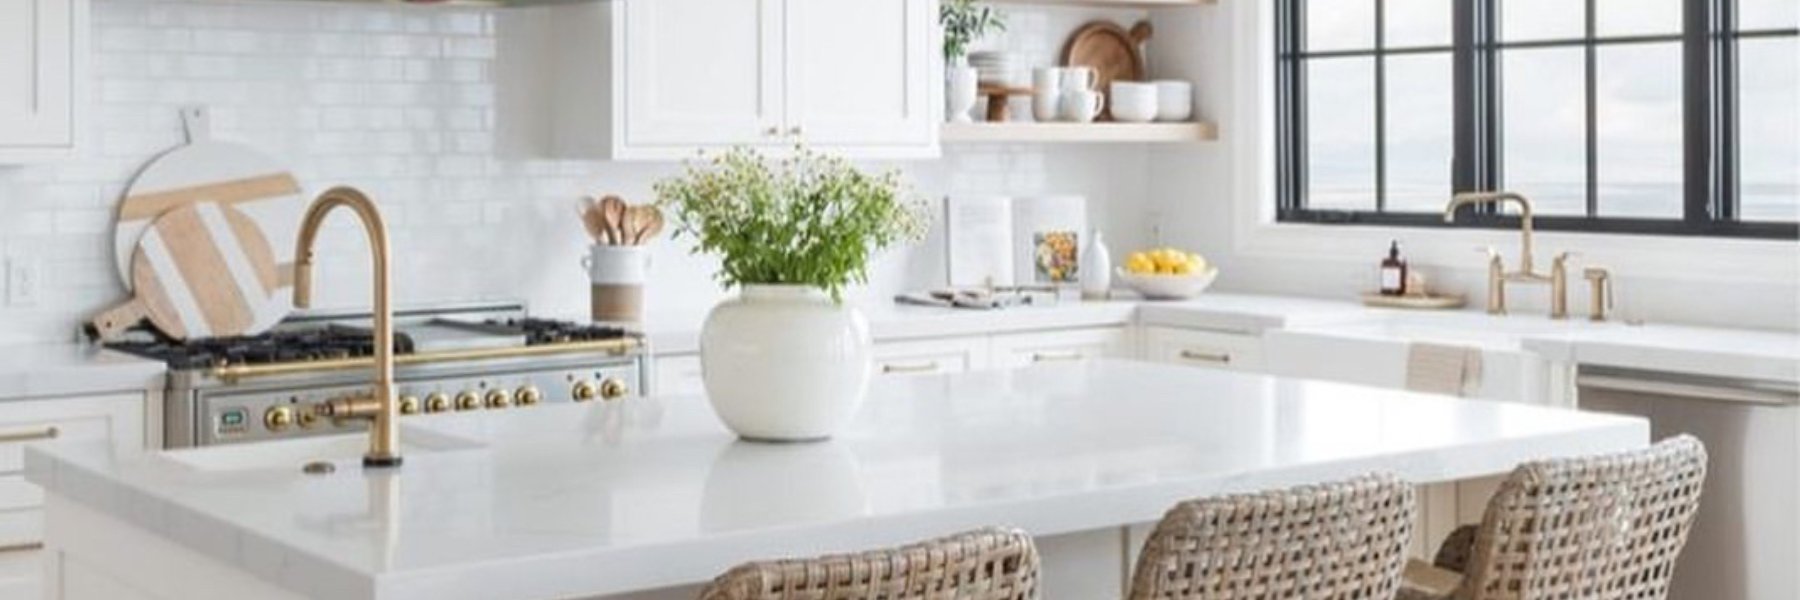 Picture of a kitchen beautifully decorated with curated decor